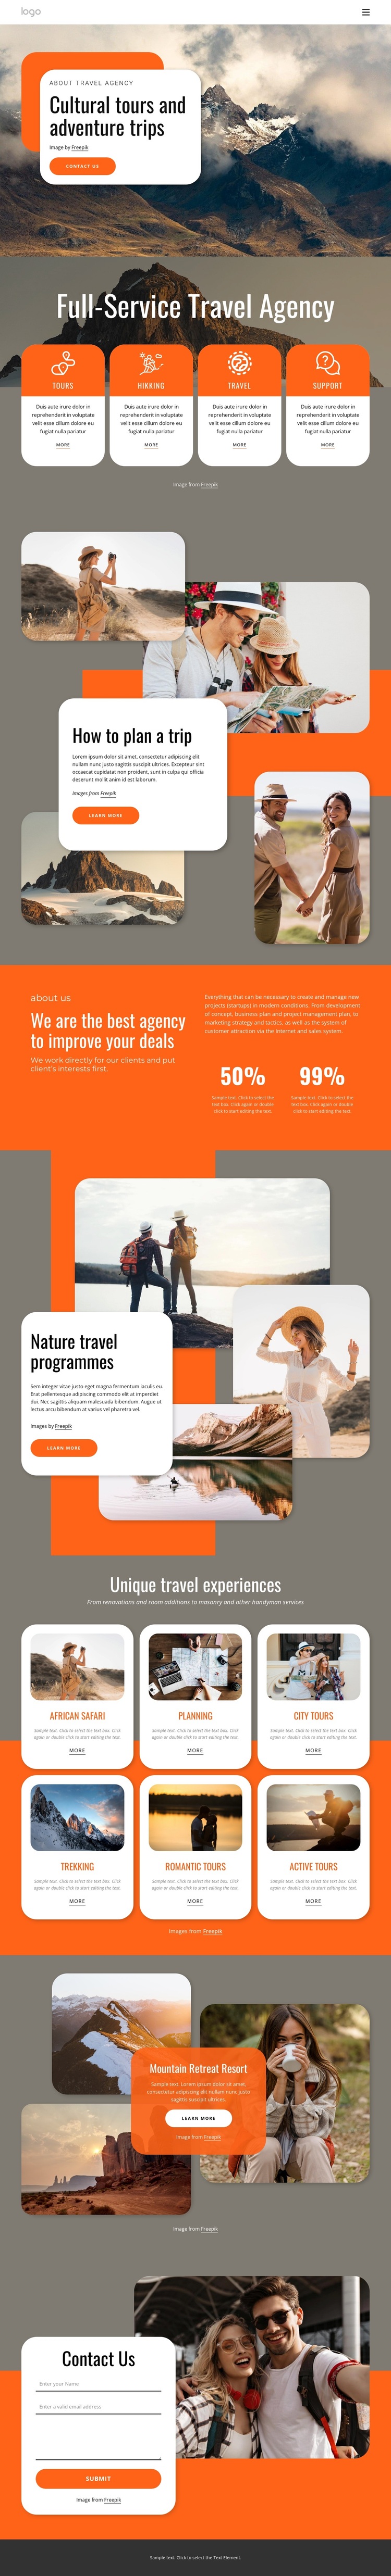 Group travel for all ages Joomla Page Builder